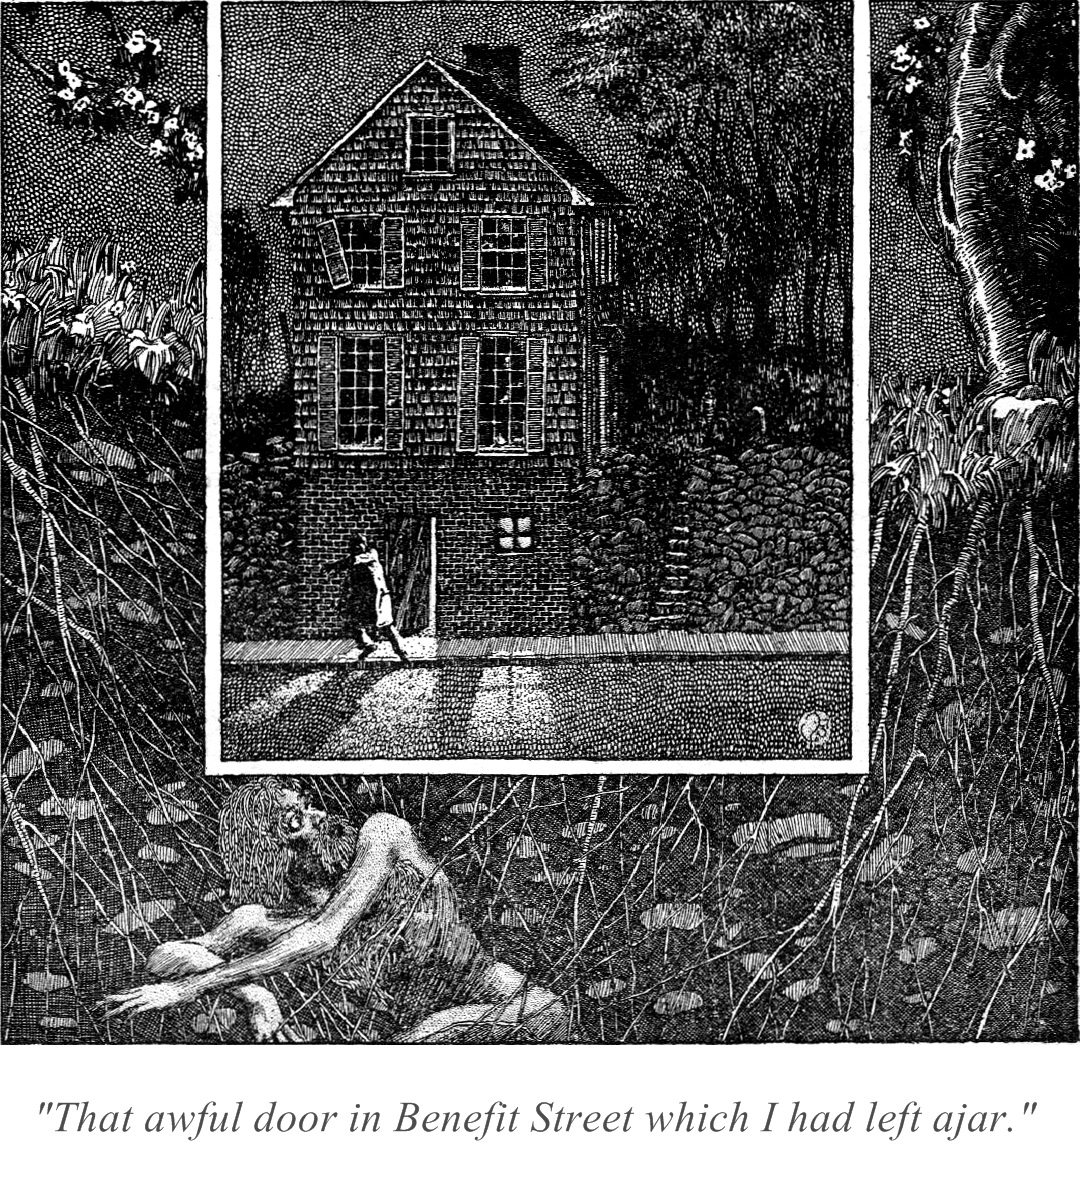 Illustration, taken from Weird Tales magazine, for the short story The Shunned House by H. P. Lovecraft